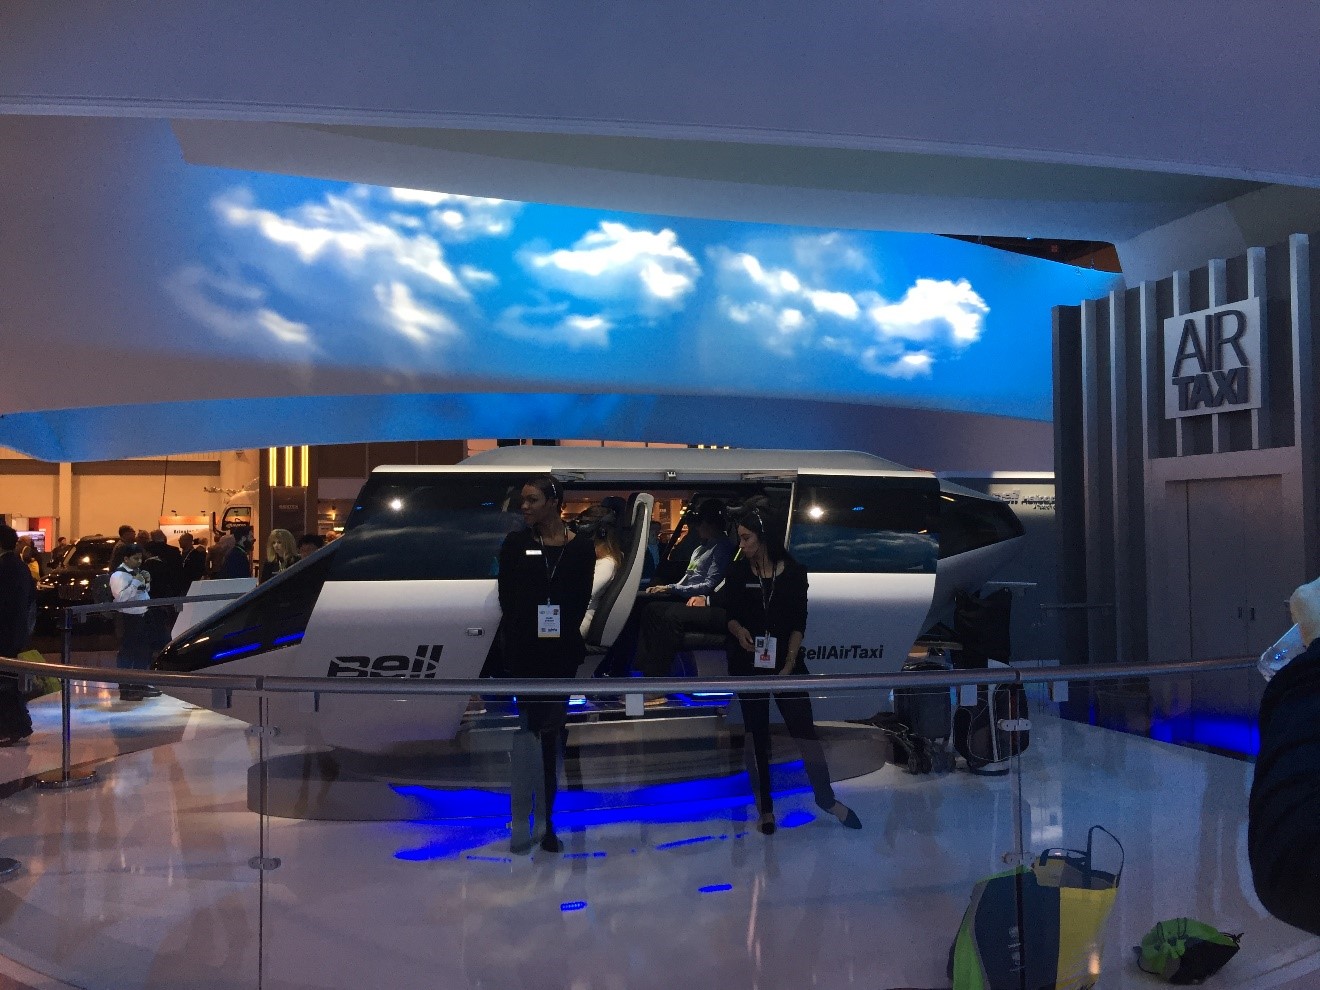 Bell helicopter made headlines with its electric flying taxi. The cabin of the helicopter was on display for all to see and the helicopter maker plans to unveil the full model at a later date. Bell wants to make helicopter travel a more affordable proposition that’s available to everyone. 